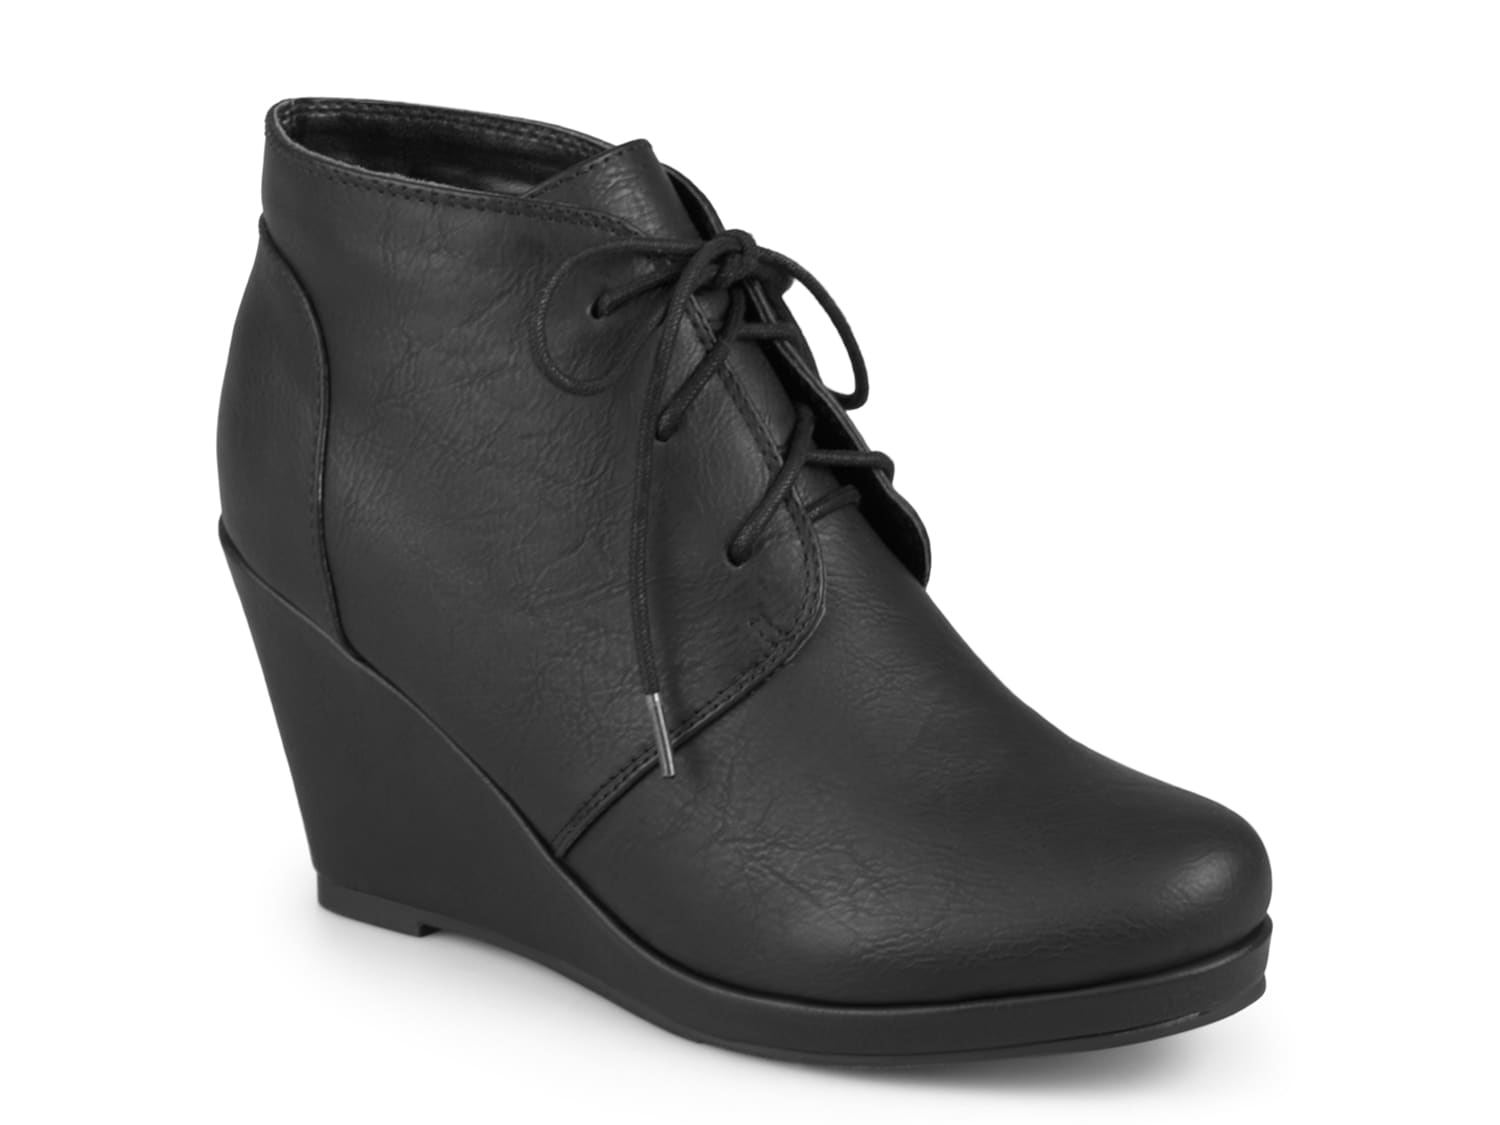 Journee Collection Gentry Wedge Bootie - Free Shipping | DSW